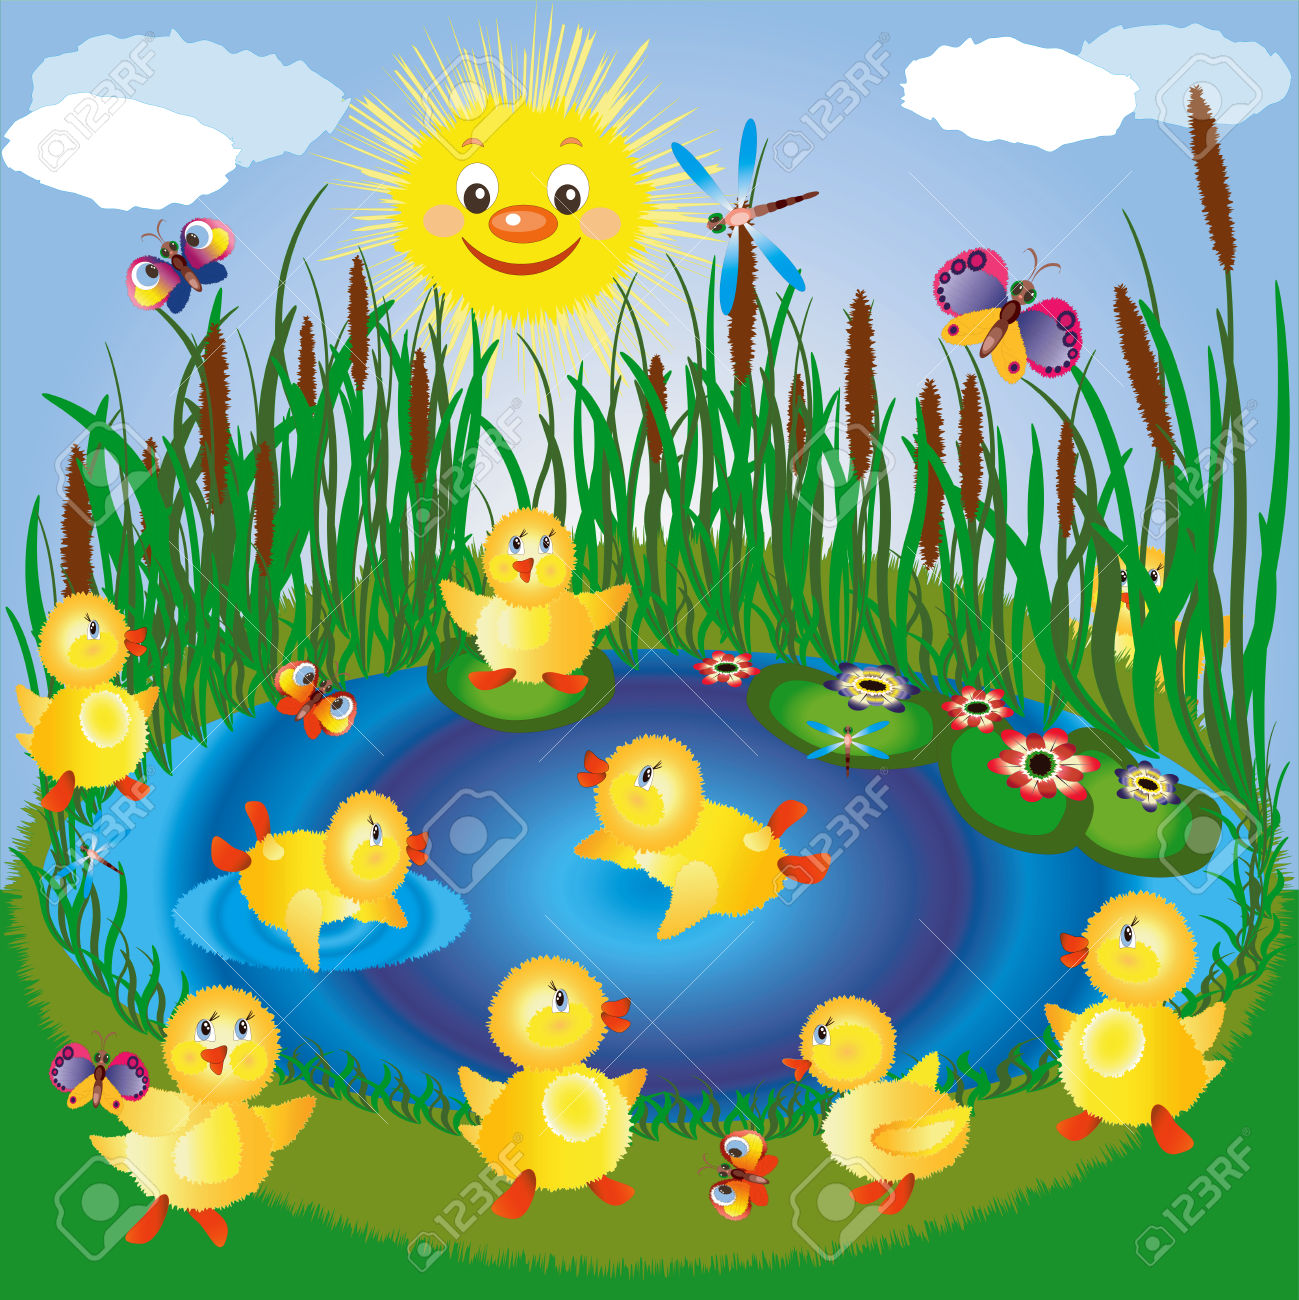 ducks in a pond clipart - Clipground